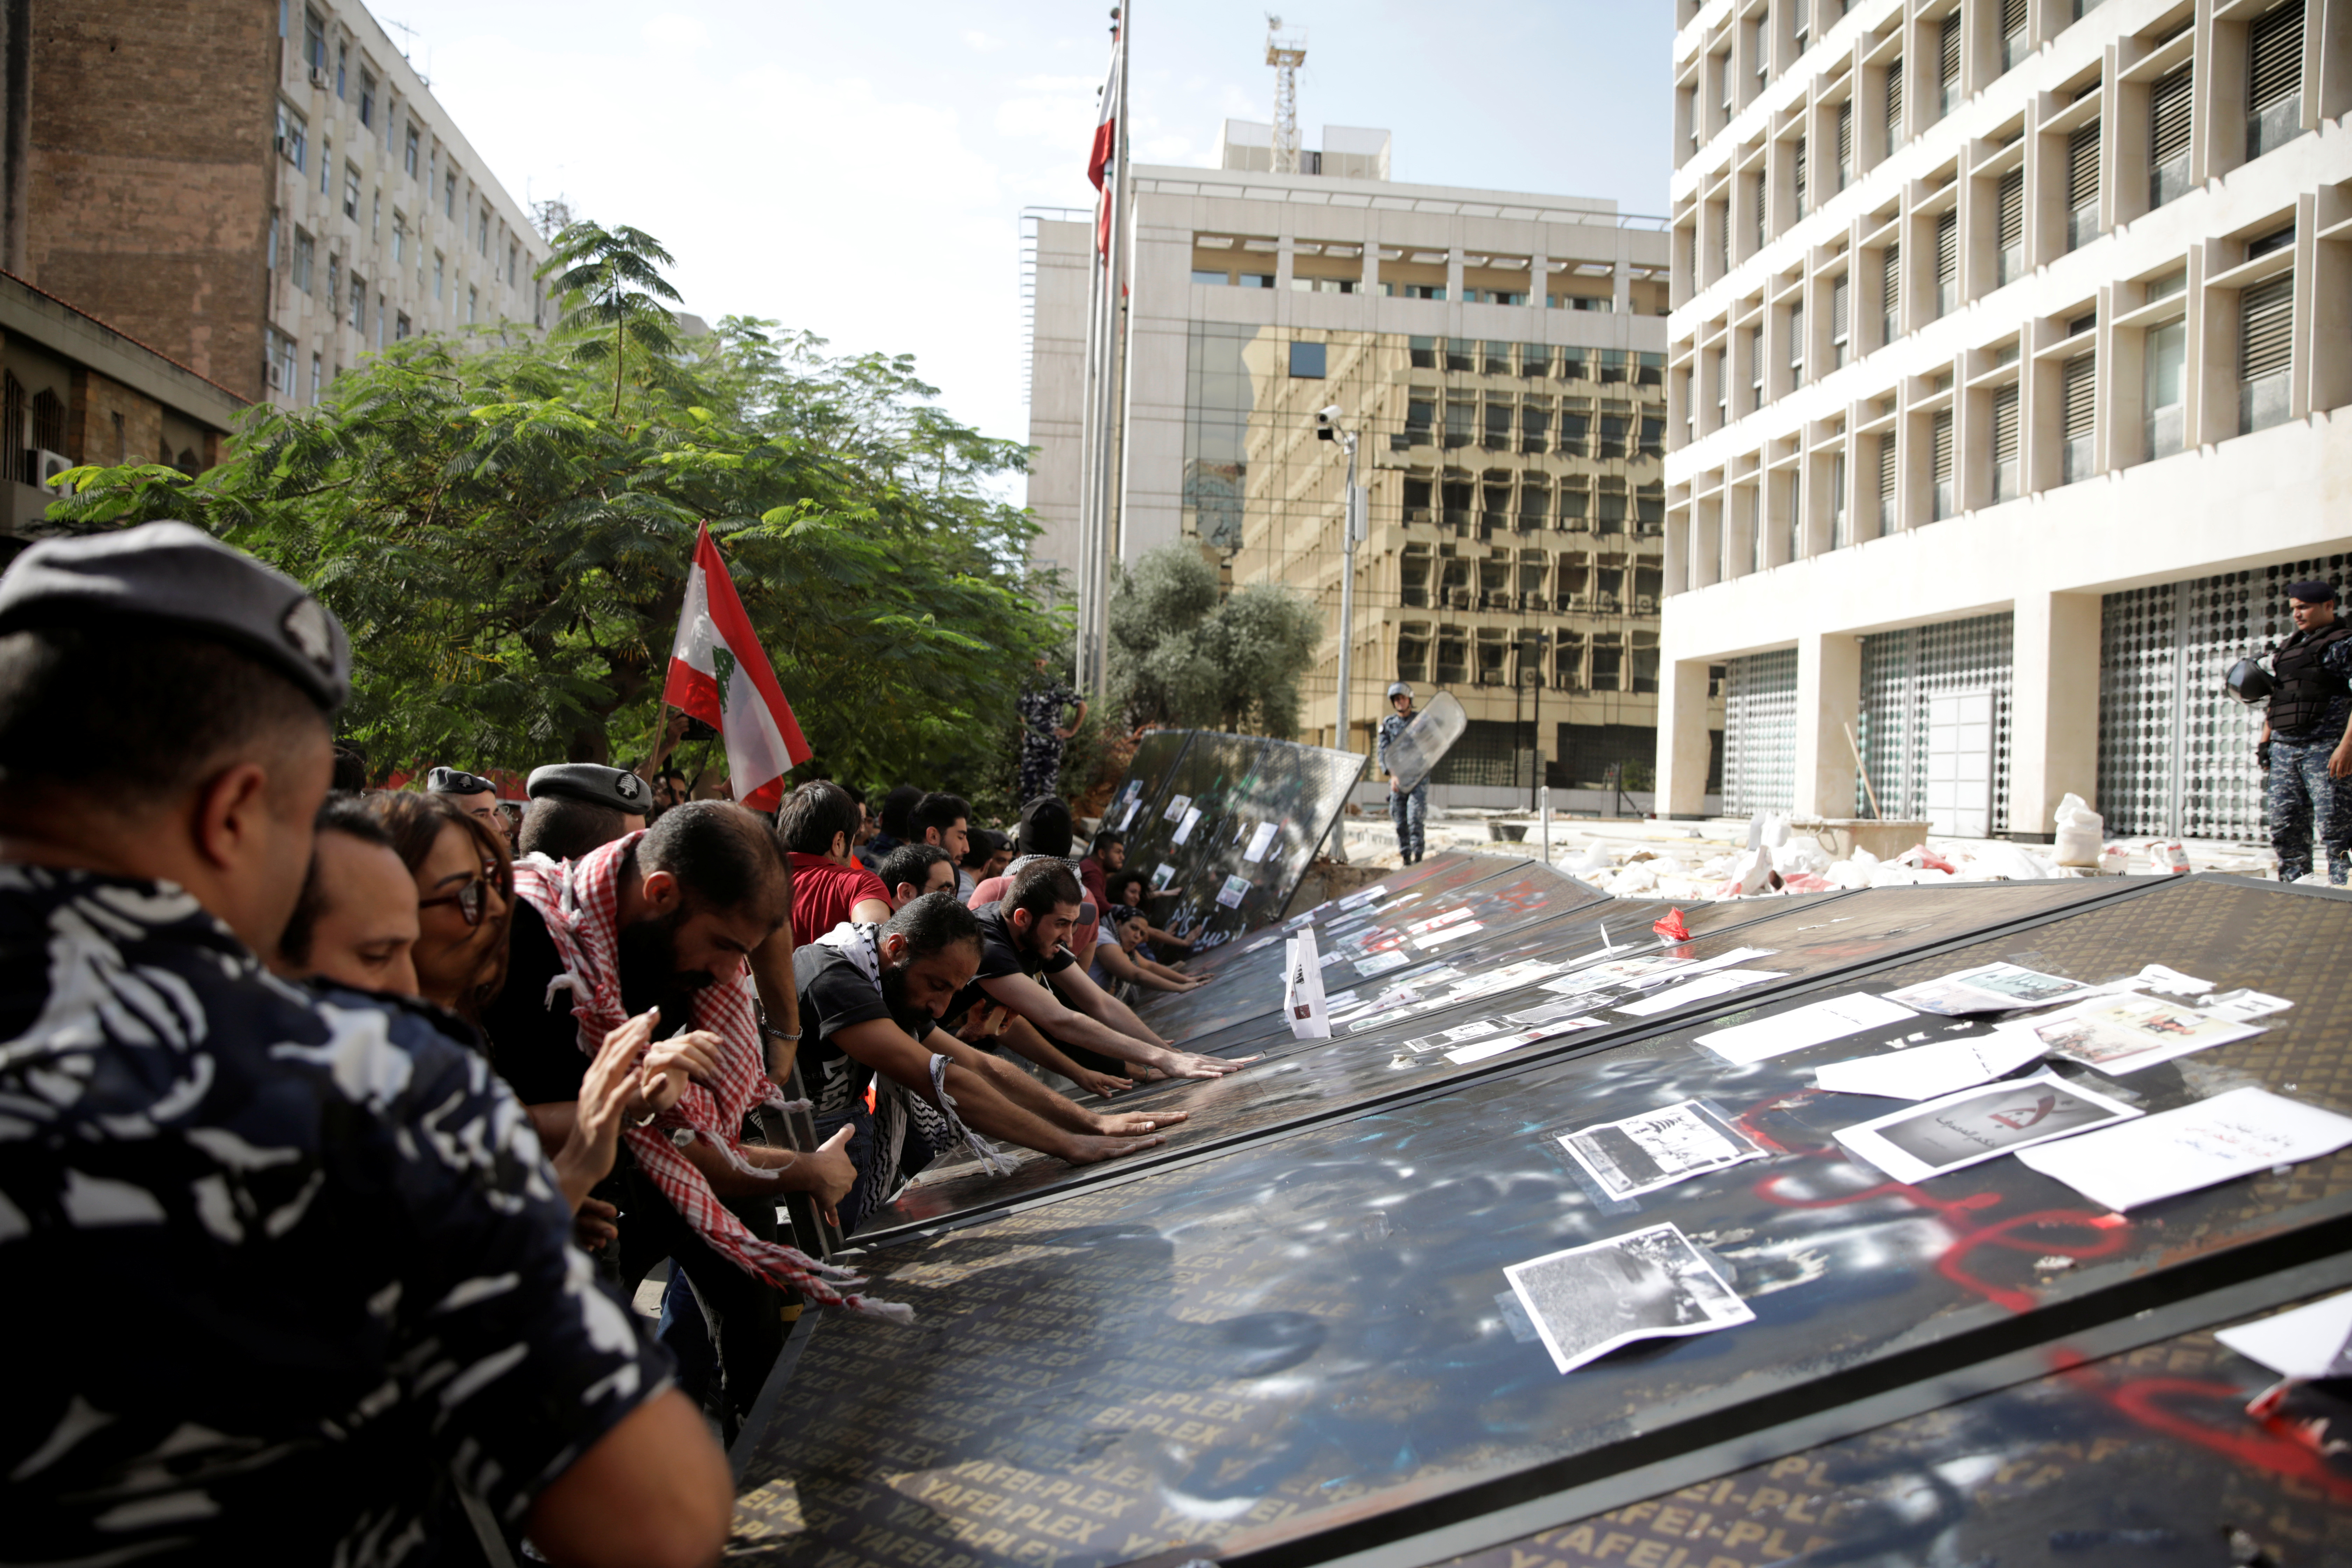 Protesters gather outside Lebanon’s central bank in Beirut in 2019 (Reuters)